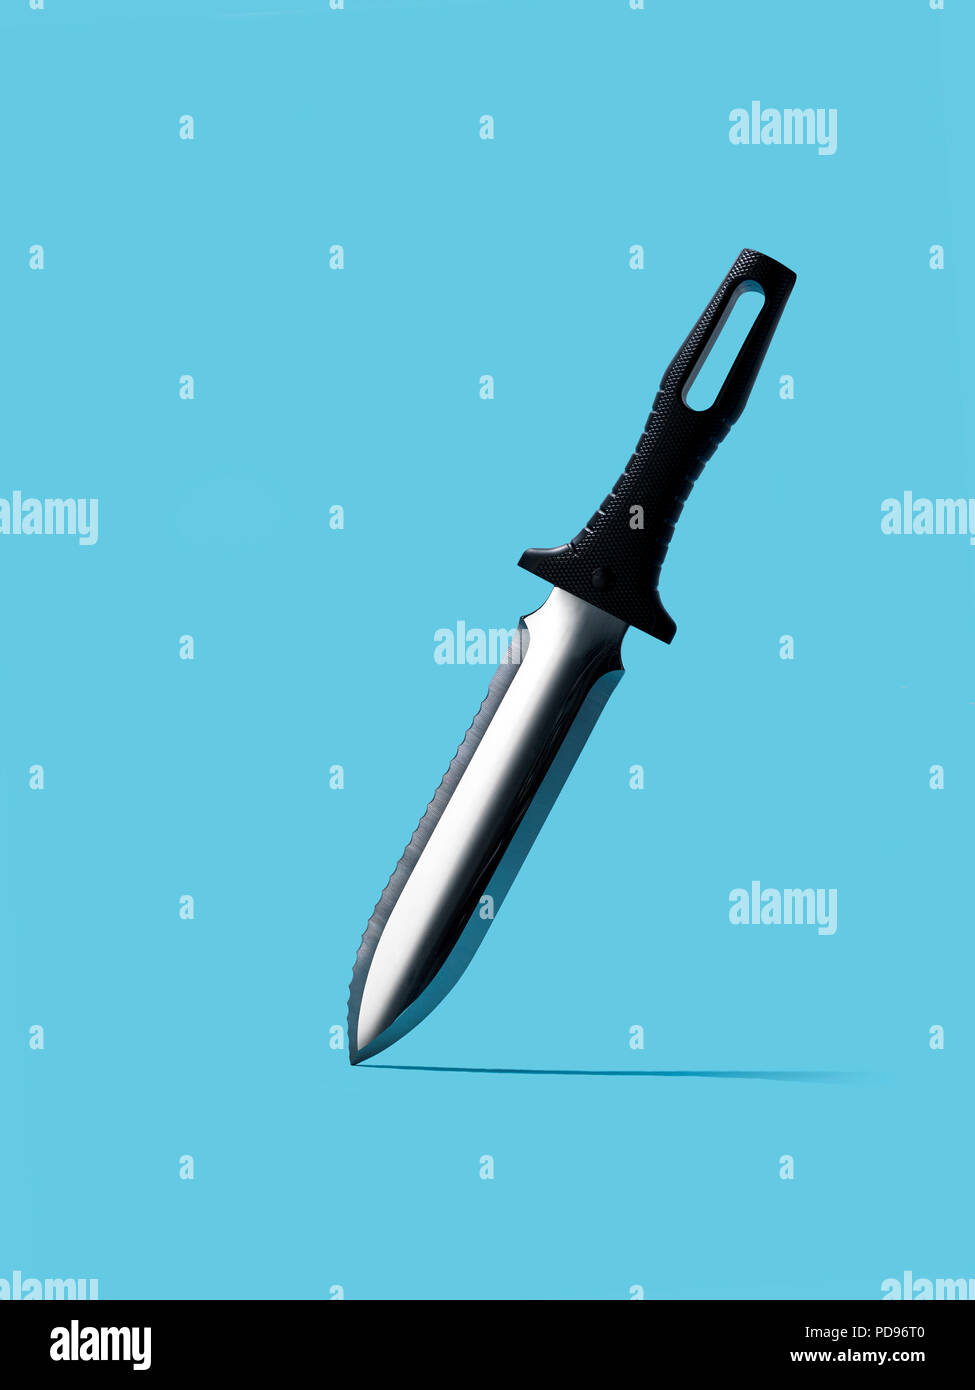 Hunting knife on a blue background Stock Photo